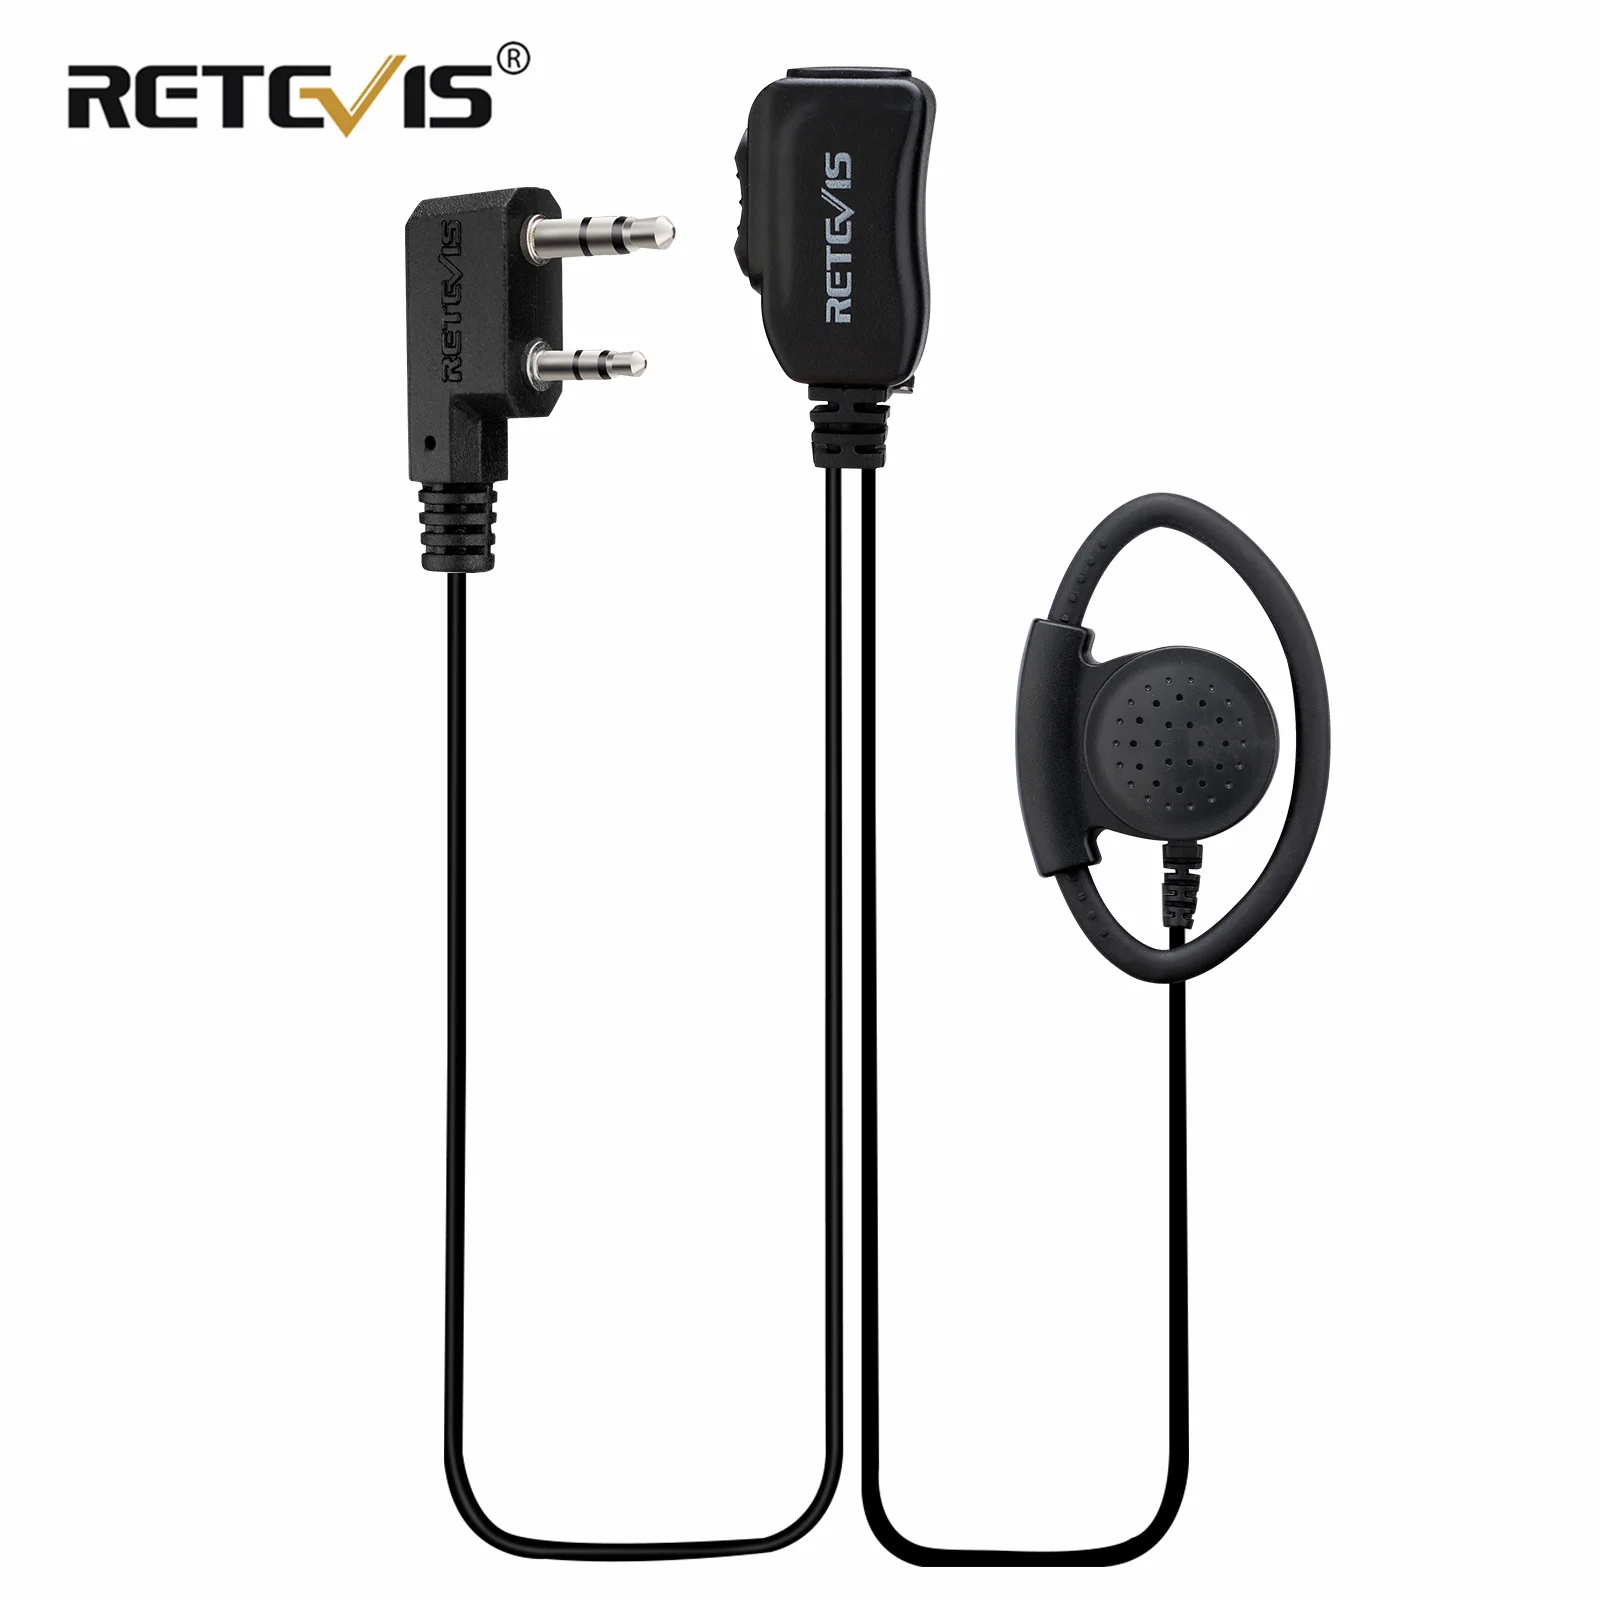 

Retevis EEK012 Adjustable D-shape Walkie Talkie Headset with PTT and Mic for Kenwood Baofeng UV5R UV82 BF888s Retevis H777 RT5R